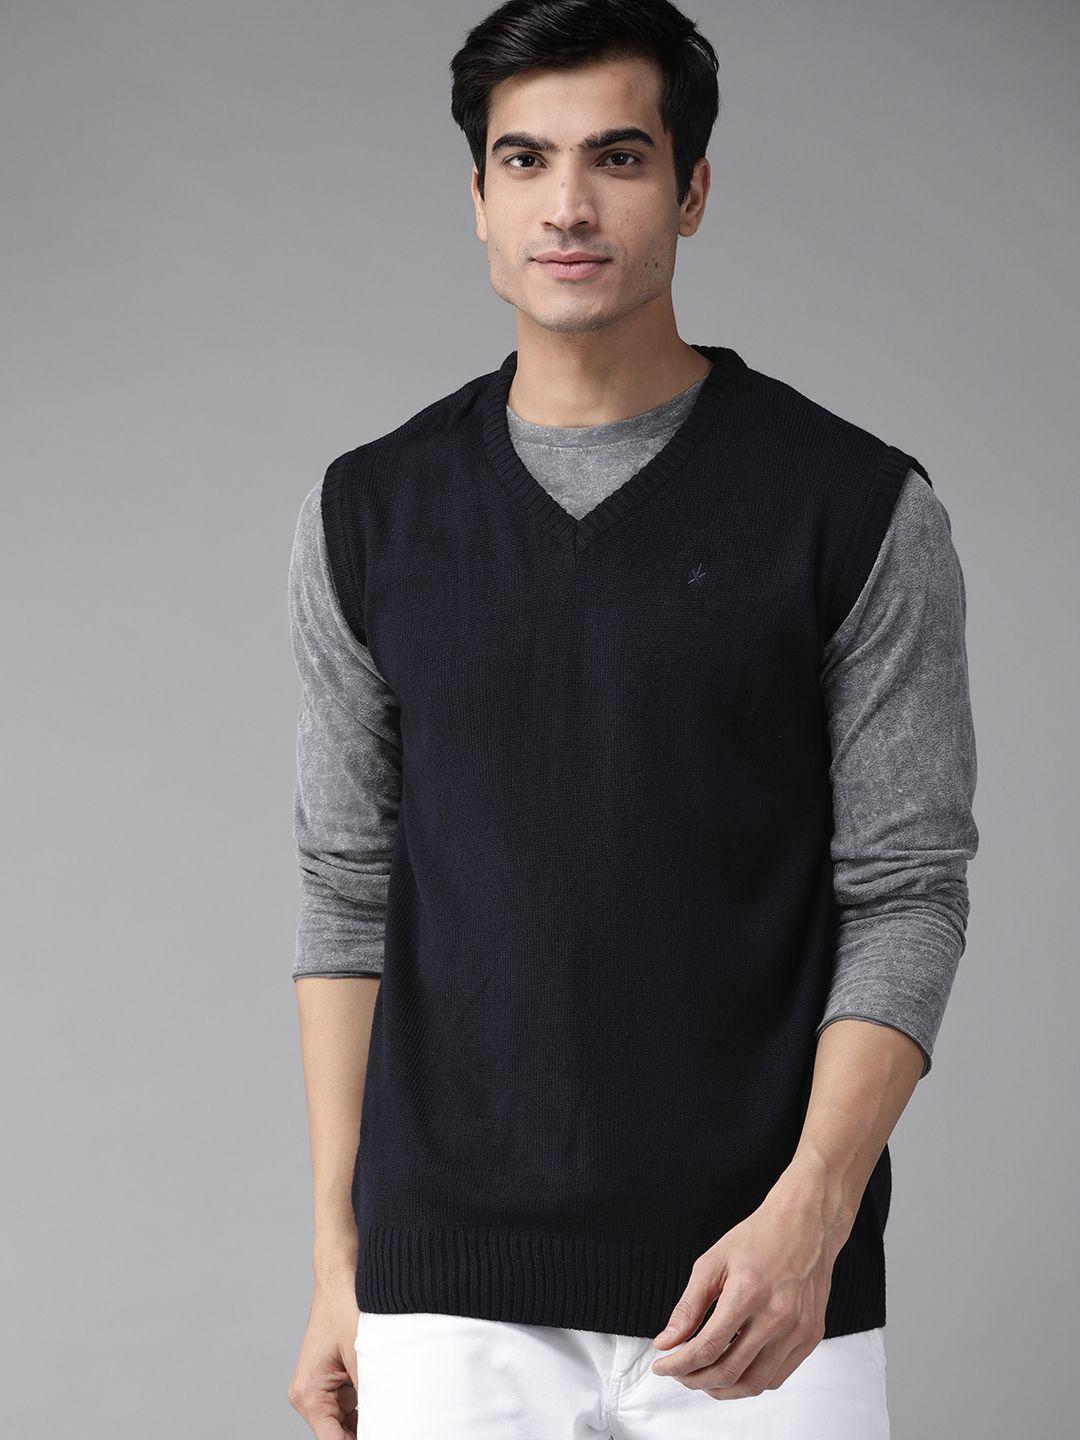 the roadster lifestyle co men navy blue solid sweater vest